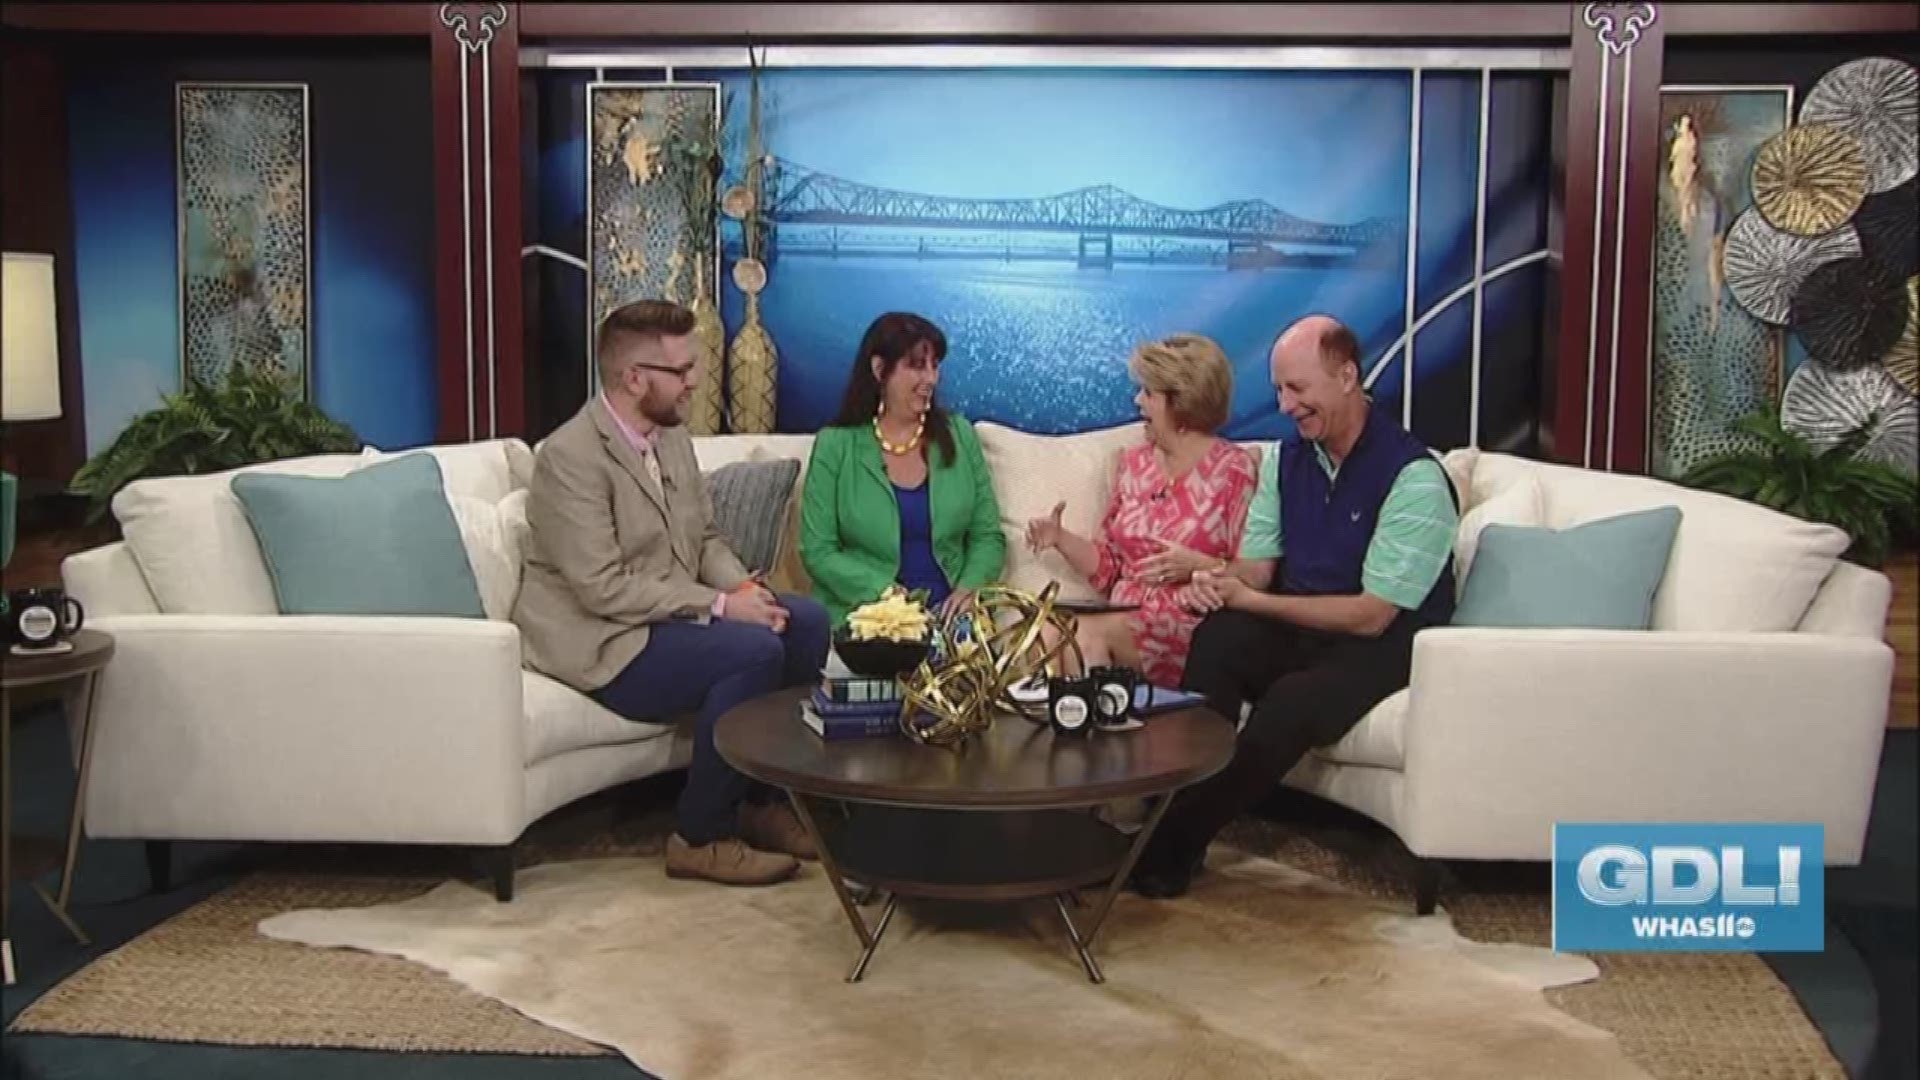 Velma Watkins and Bryan Schied are here from Burdorf Interiors to debut our newest furniture set, which you'll have the chance to win over the next few months. Burdorf's Memorial Day Sale is this weekend and you can enter to win our GDL furniture set at B